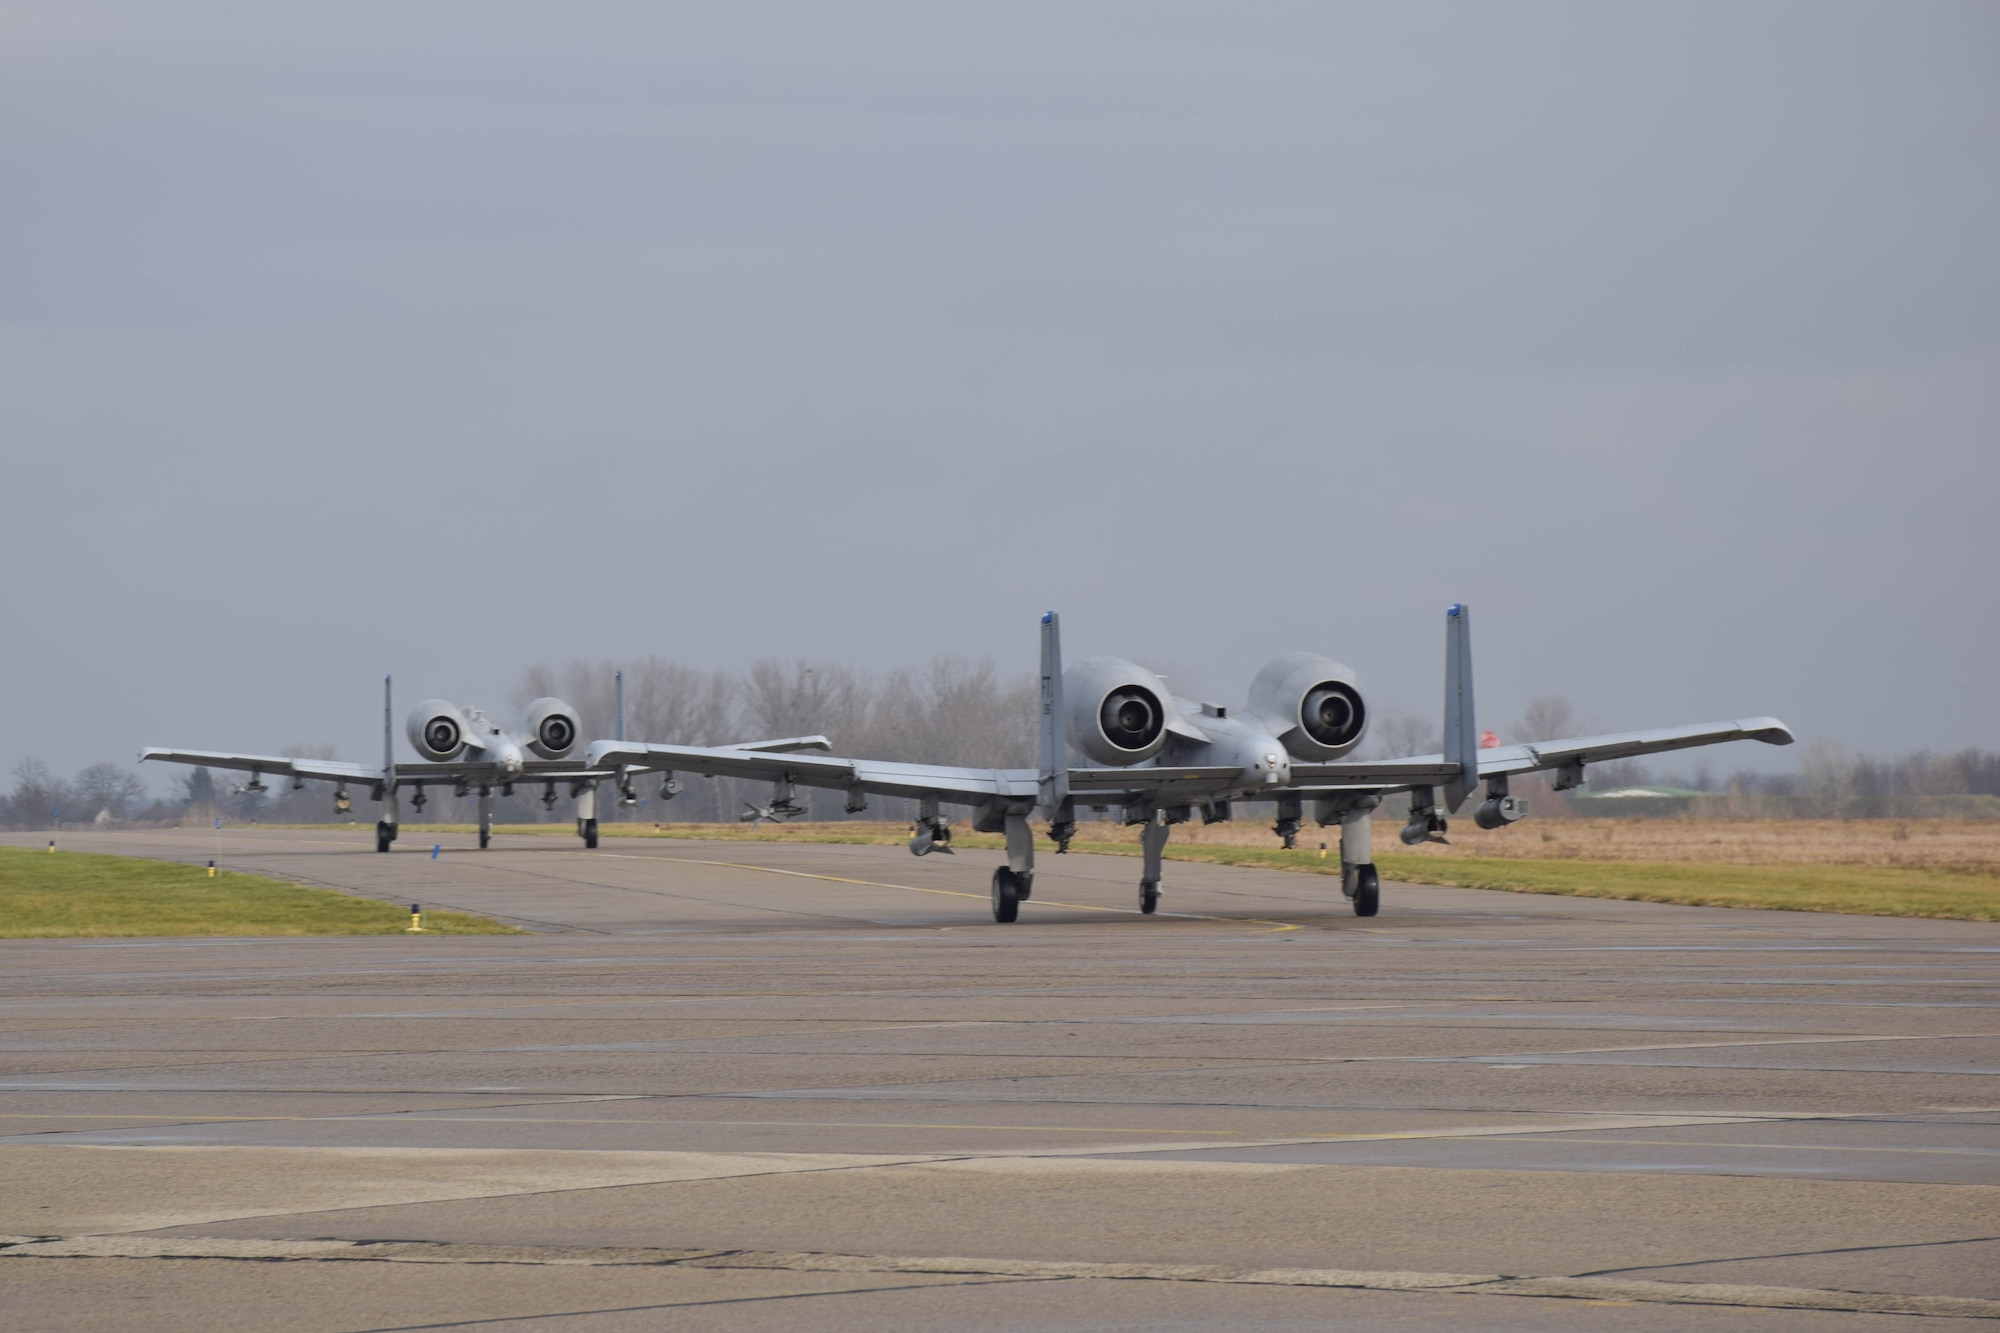 Two A-10C Thunderbolt IIs from the 74th Expeditionary Fighter Squadron taxi at Papa Air Base, Hungary, Dec. 2, where they are currently on a micro-deployment as part of a Theater Security Package. The purpose of the deployment is to conduct training and exercises alongside the Hungarian Air Force to increase readiness and enhance interoperability. (U.S. Air Force photo/ Capt. Lauren Ott)